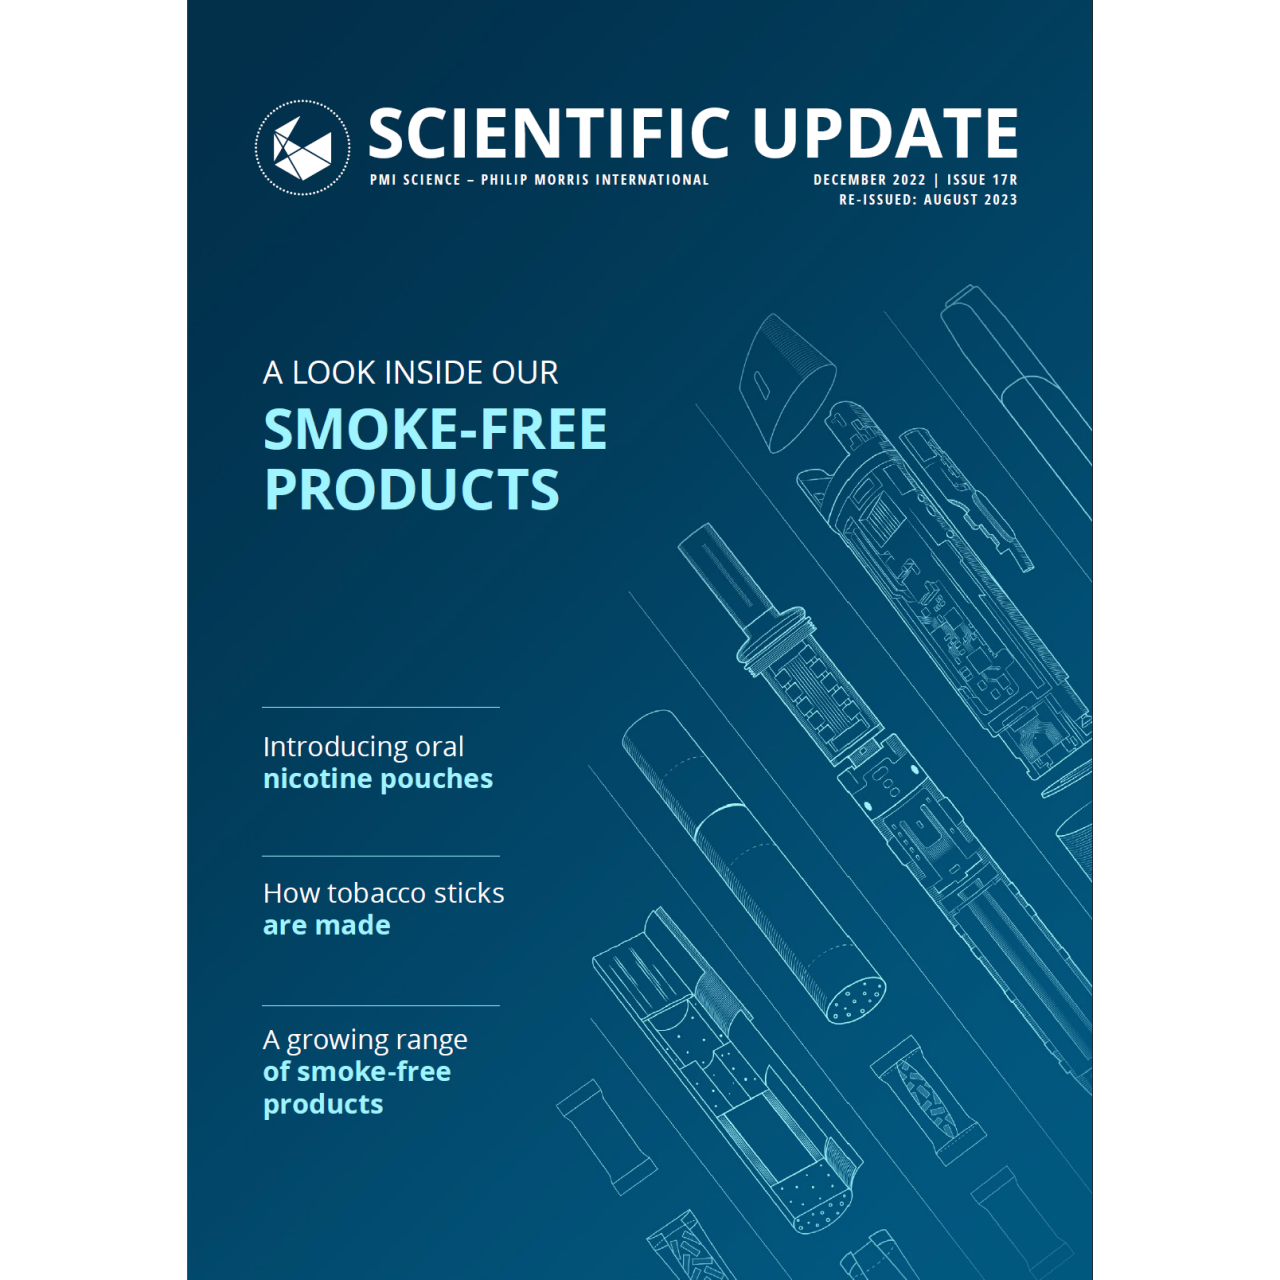 Scientific Update 17r: A look inside our smoke-free products